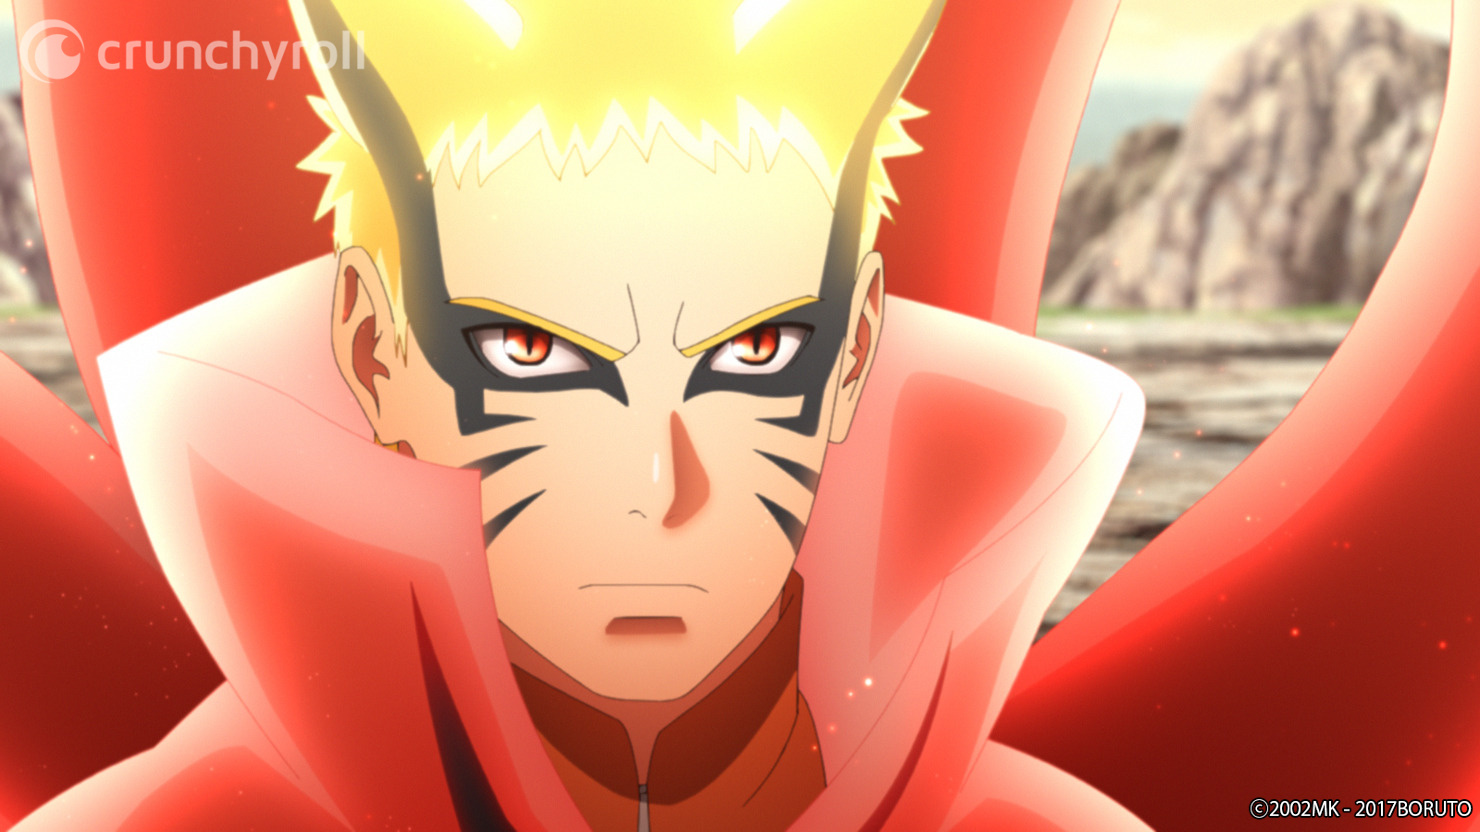 BORUTO Animators Hang fun Action-Packed Episode 217 and Demonstrate Off Their Fabulous Work